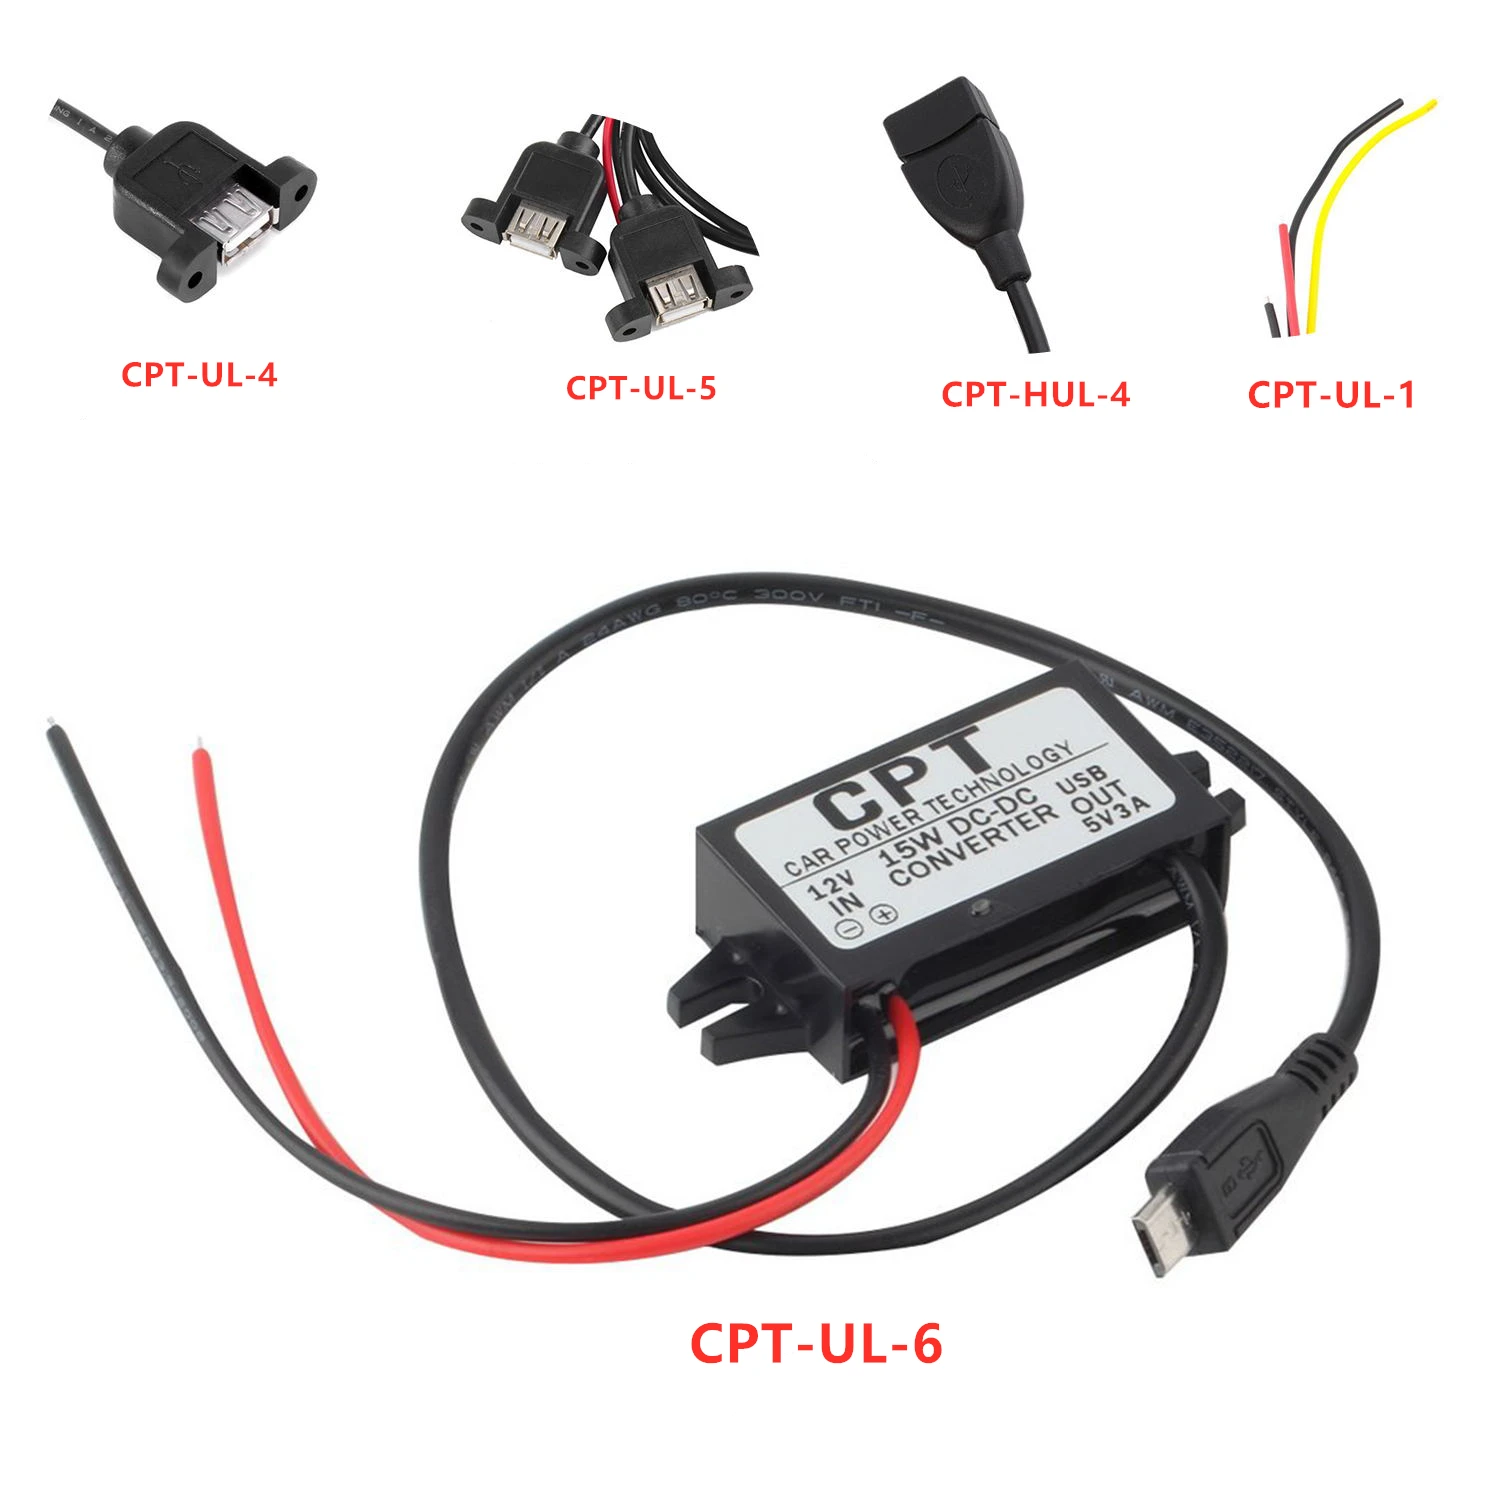 In stock！5 Types Car Power  Technology Charger DC Converter Module Single Port 12V To 5V 3A 15W with Micro USB Cable Durable